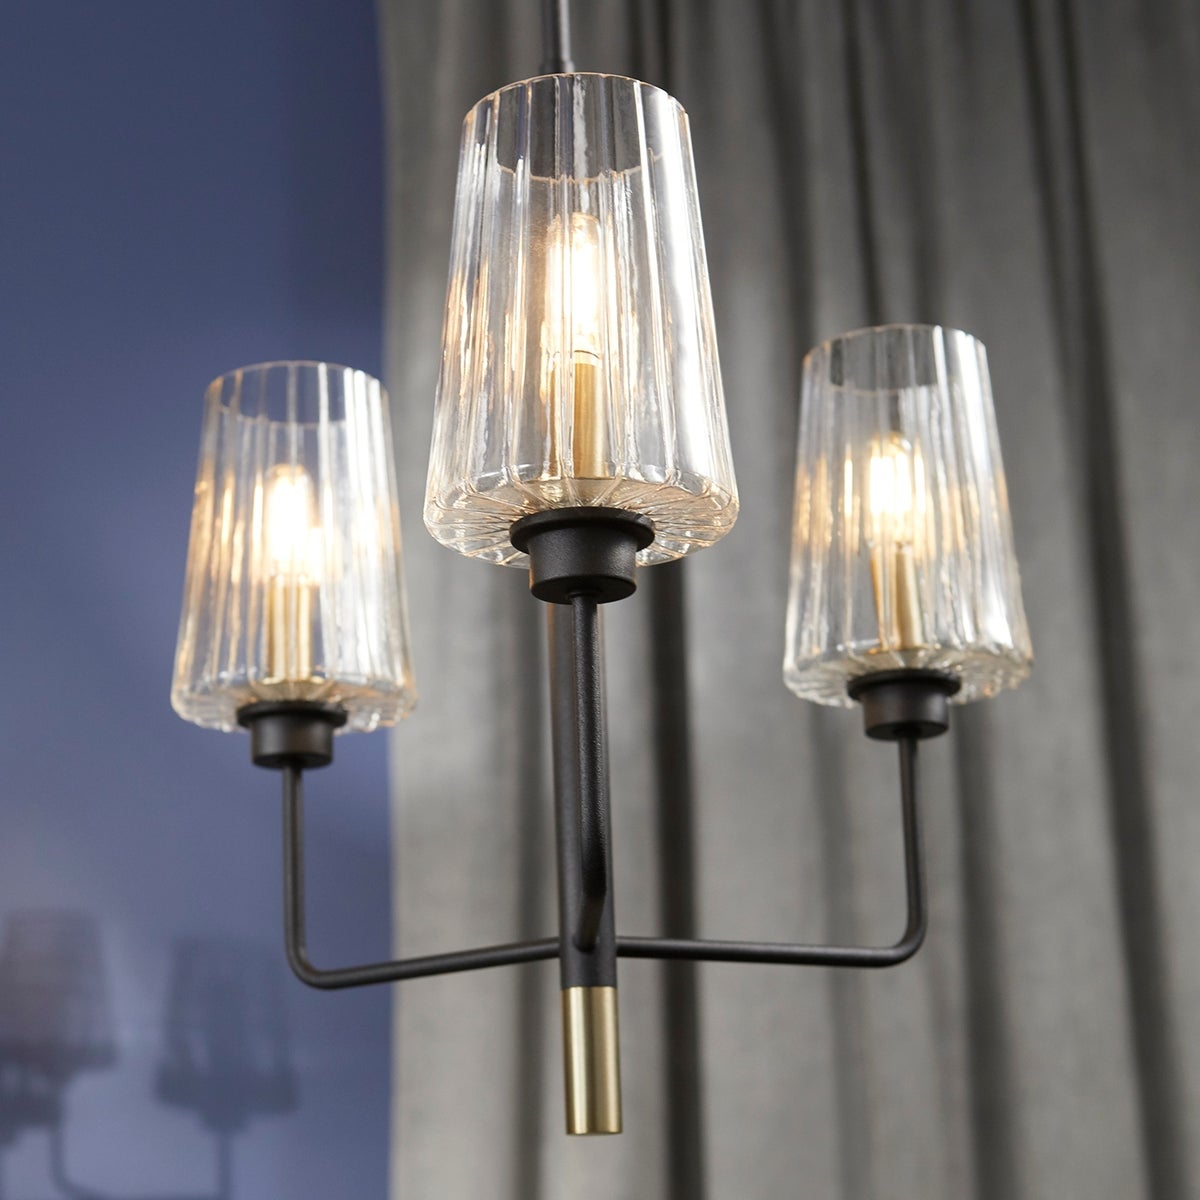 Bathroom chandelier with three clear glass shades, aged brass and noir finish. Linear frame with soft-angular curves. Adjustable chain/stem hung suspension system. Suitable for bathrooms, outdoor kitchens, and covered patios.